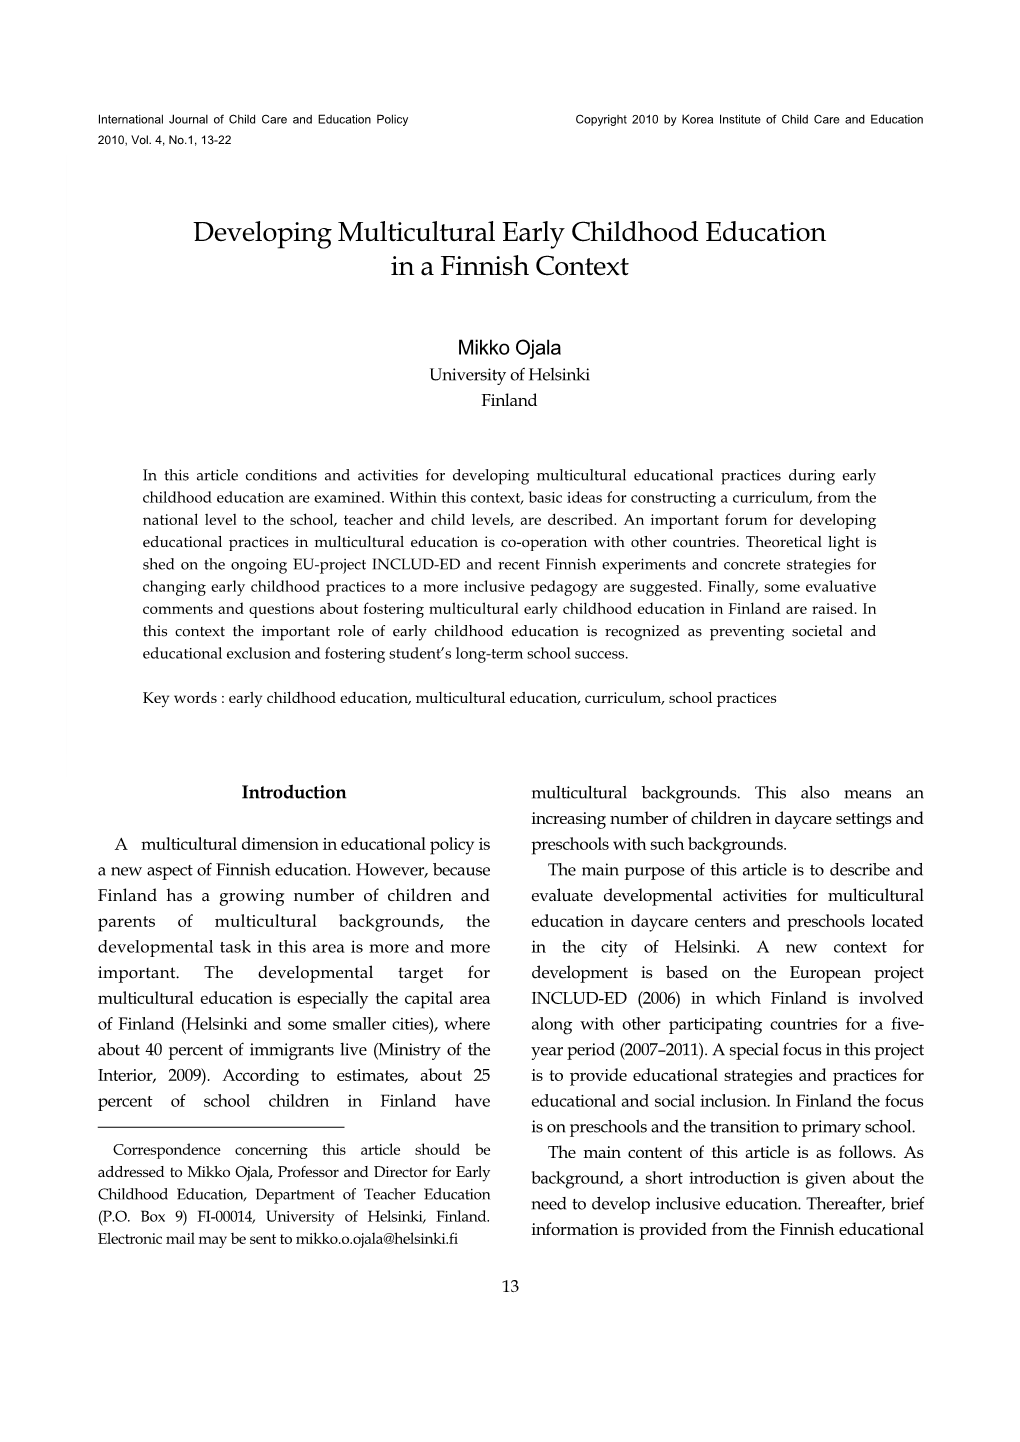 Developing Multicultural Early Childhood Education in a Finnish Context Overcoming Social Exclusion